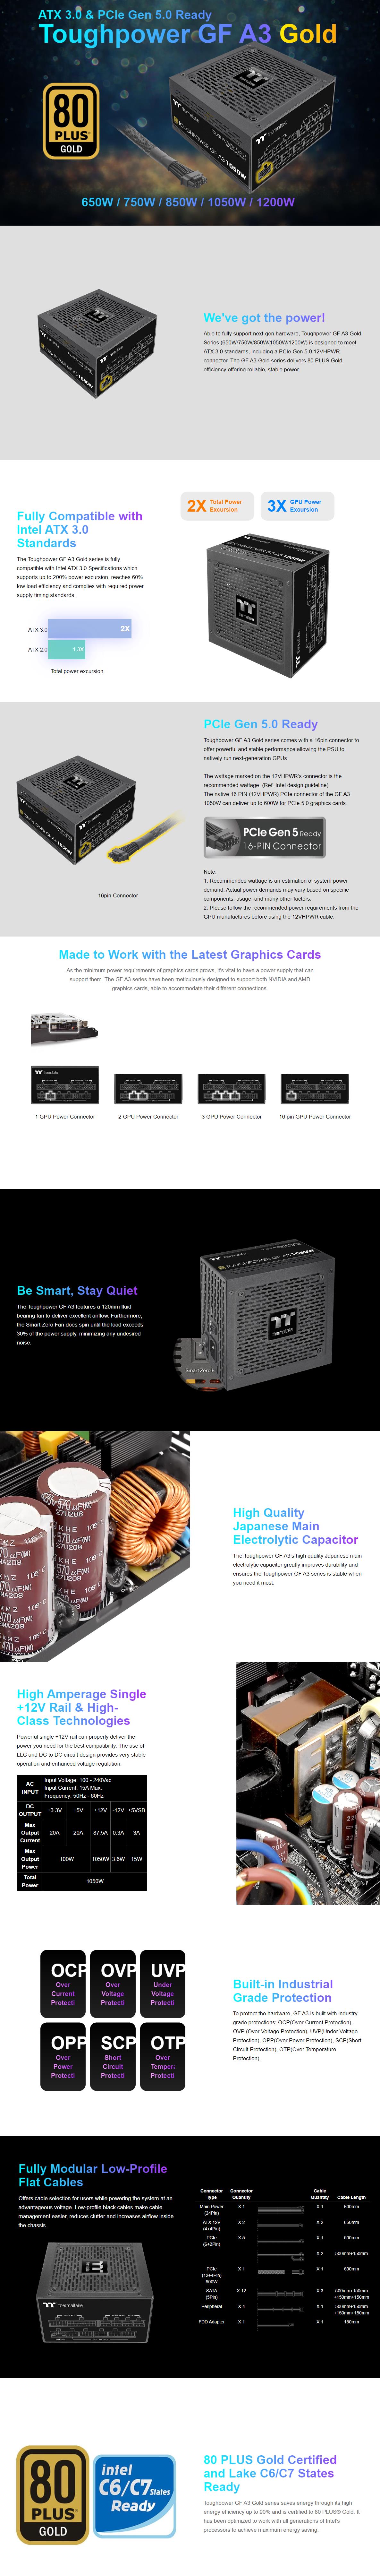 A large marketing image providing additional information about the product Thermaltake Toughpower GF A3 - 750W 80PLUS Gold PCIe 5.0 ATX Modular PSU - Additional alt info not provided